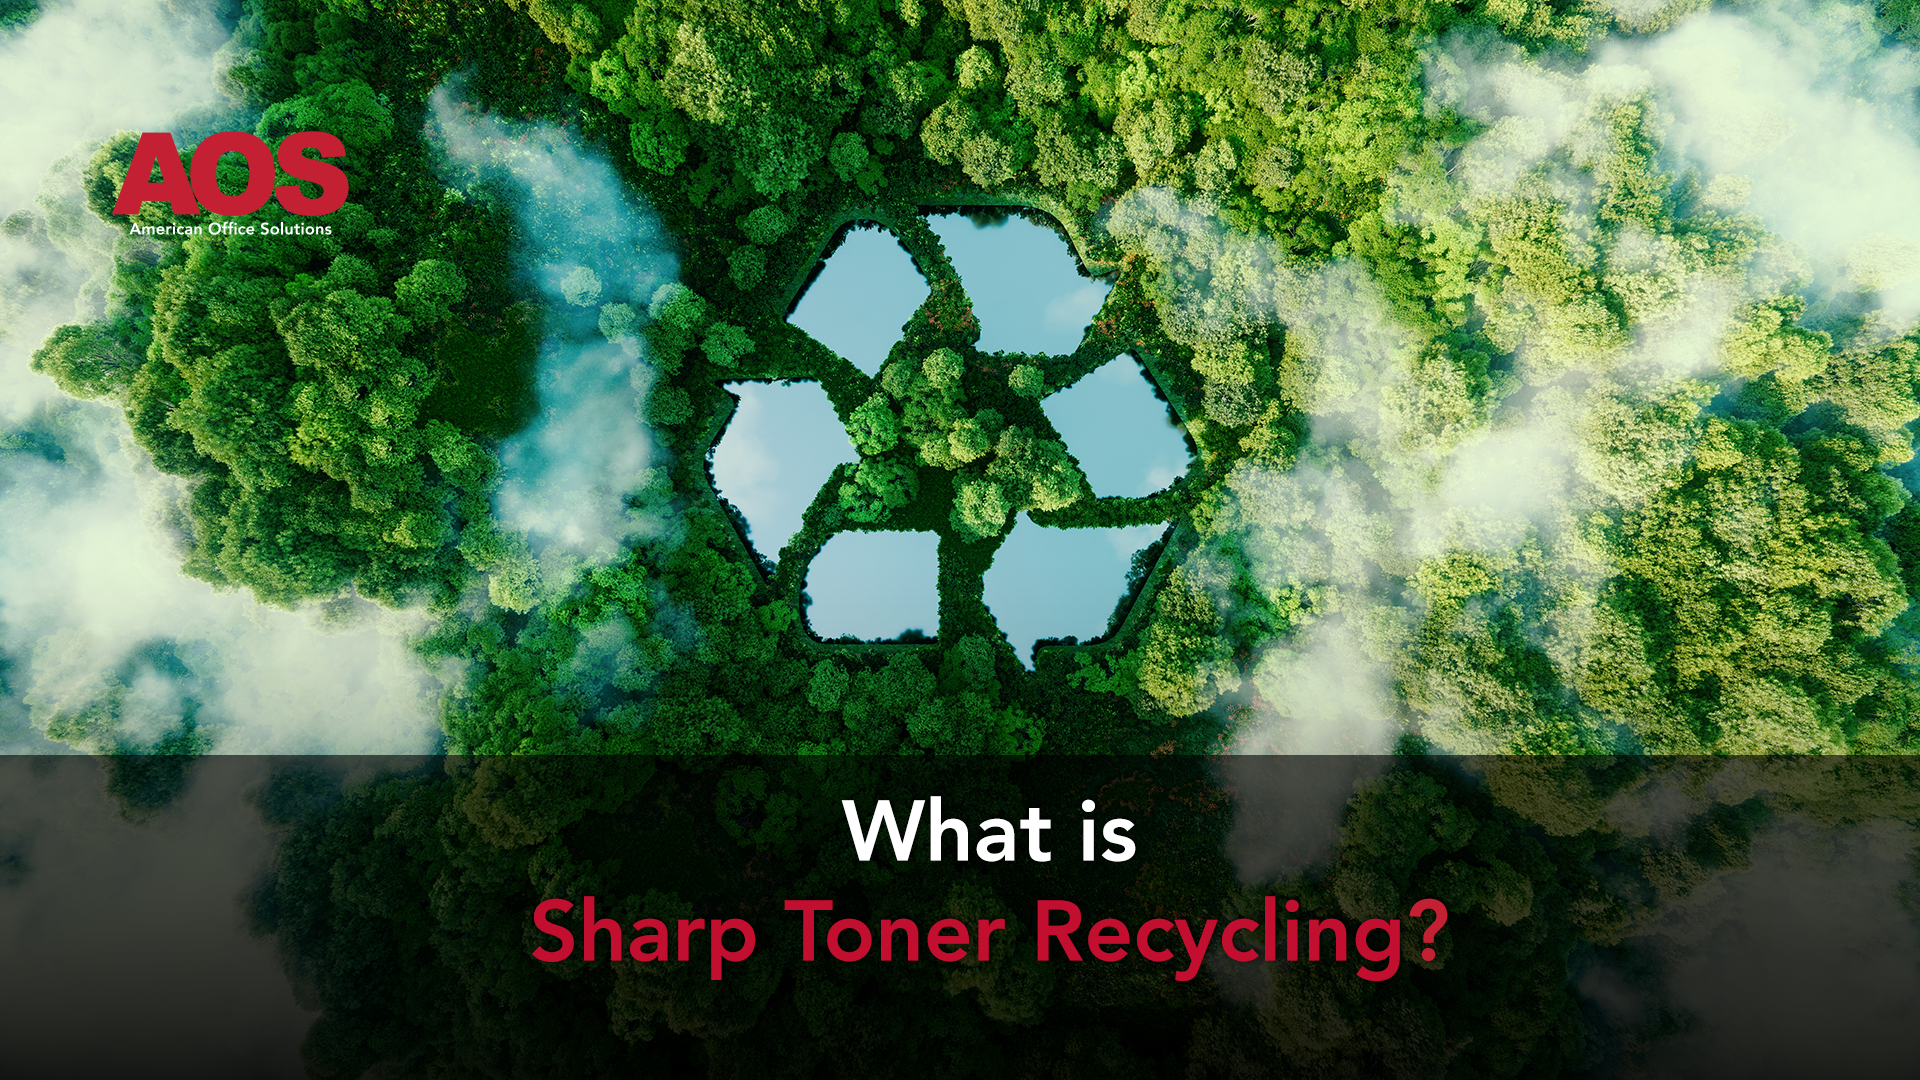 What is Sharp Toner Recycling